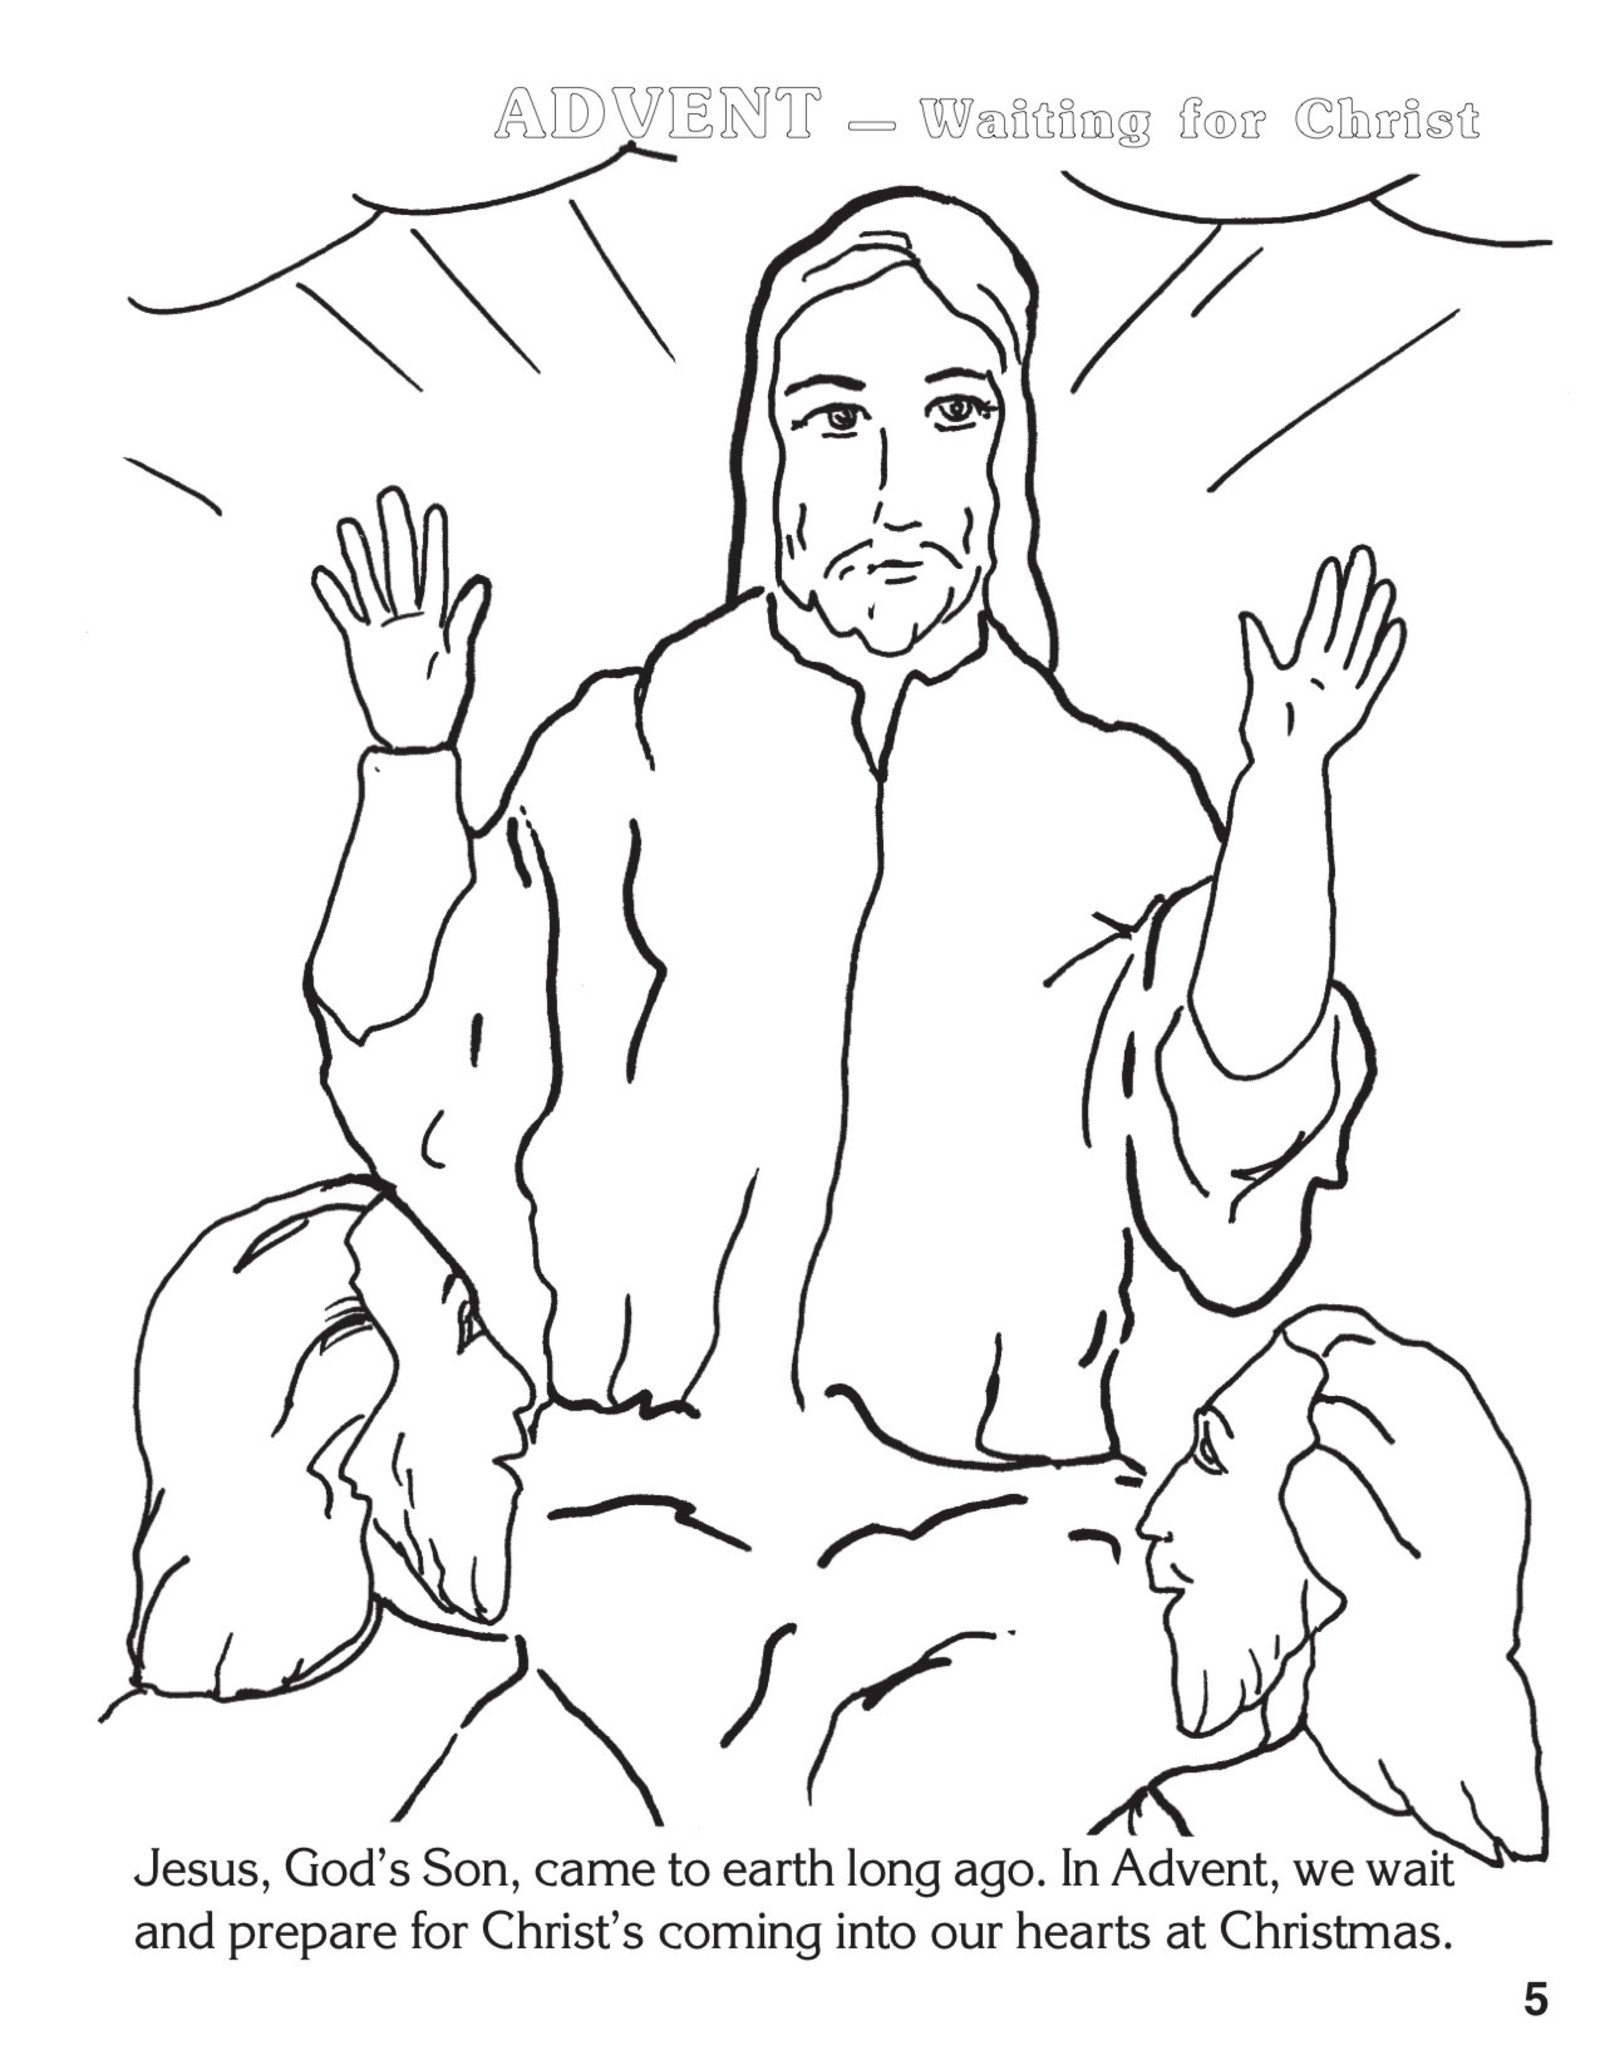 Catholic Book Publishing Coloring Book About Advent